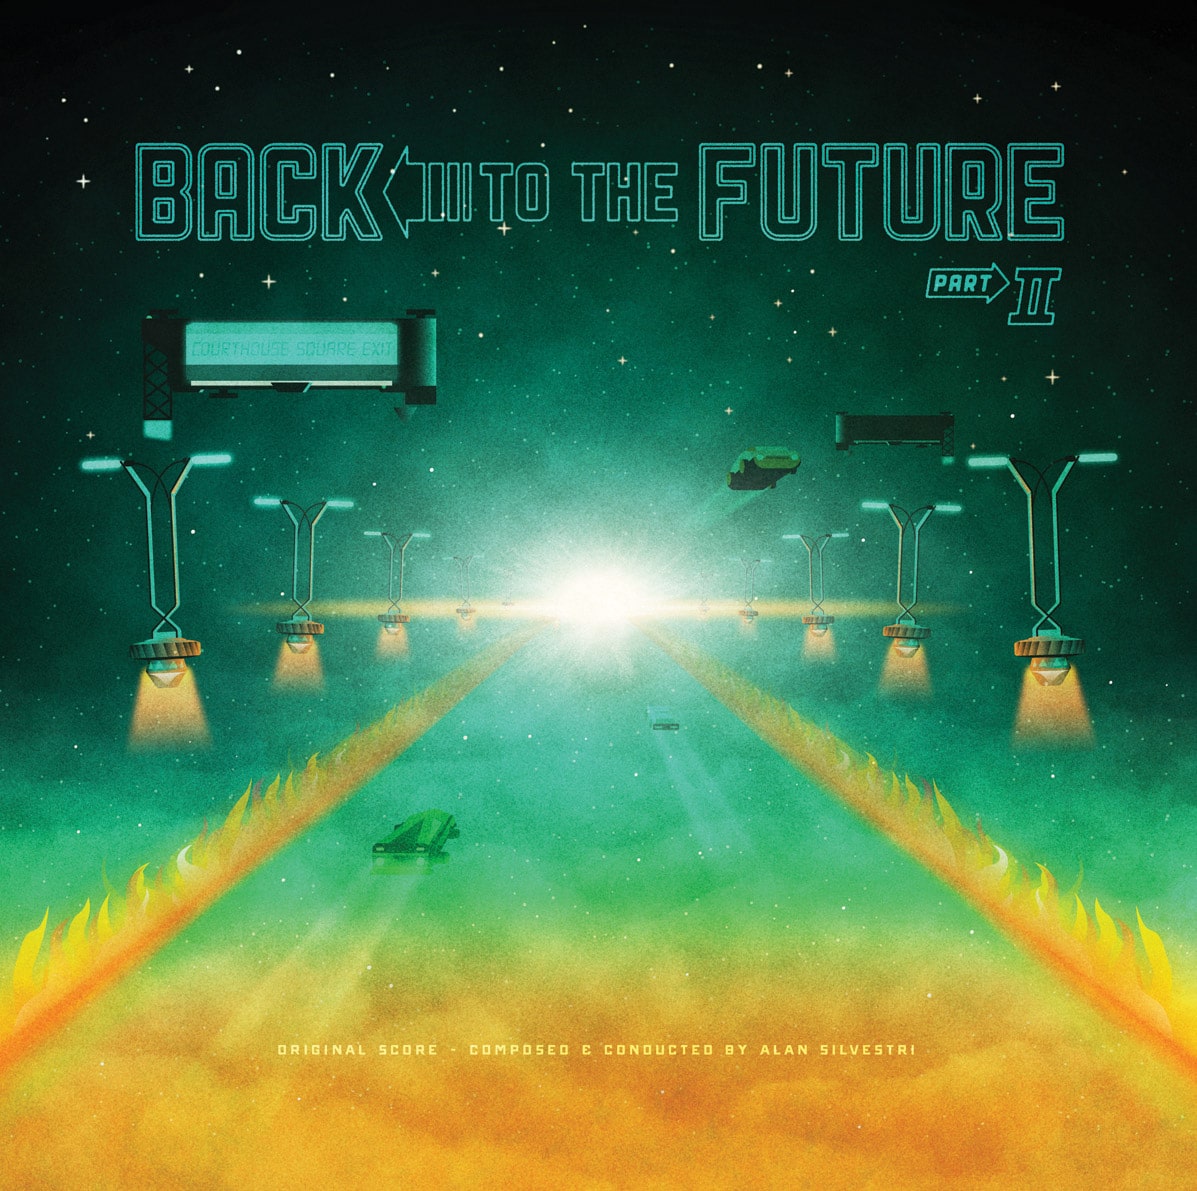 Back to the Future 2 Soundtrack Record Cover by DKNG